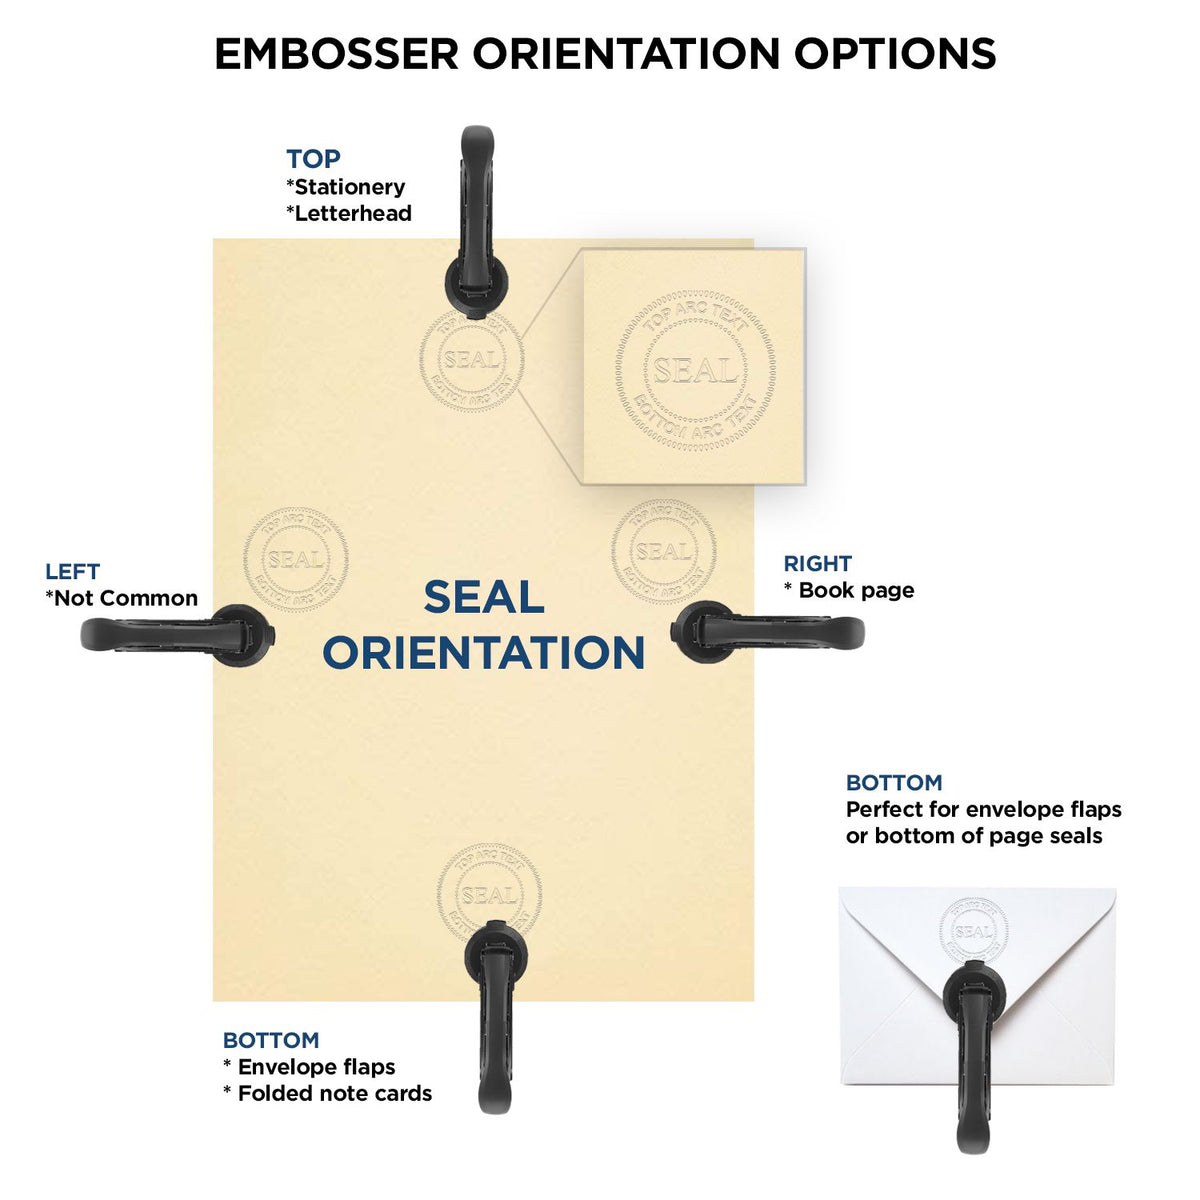 An infographic for the Indiana Geologist Desk Seal showing embosser orientation, this is showing examples of a top, bottom, right and left insert.